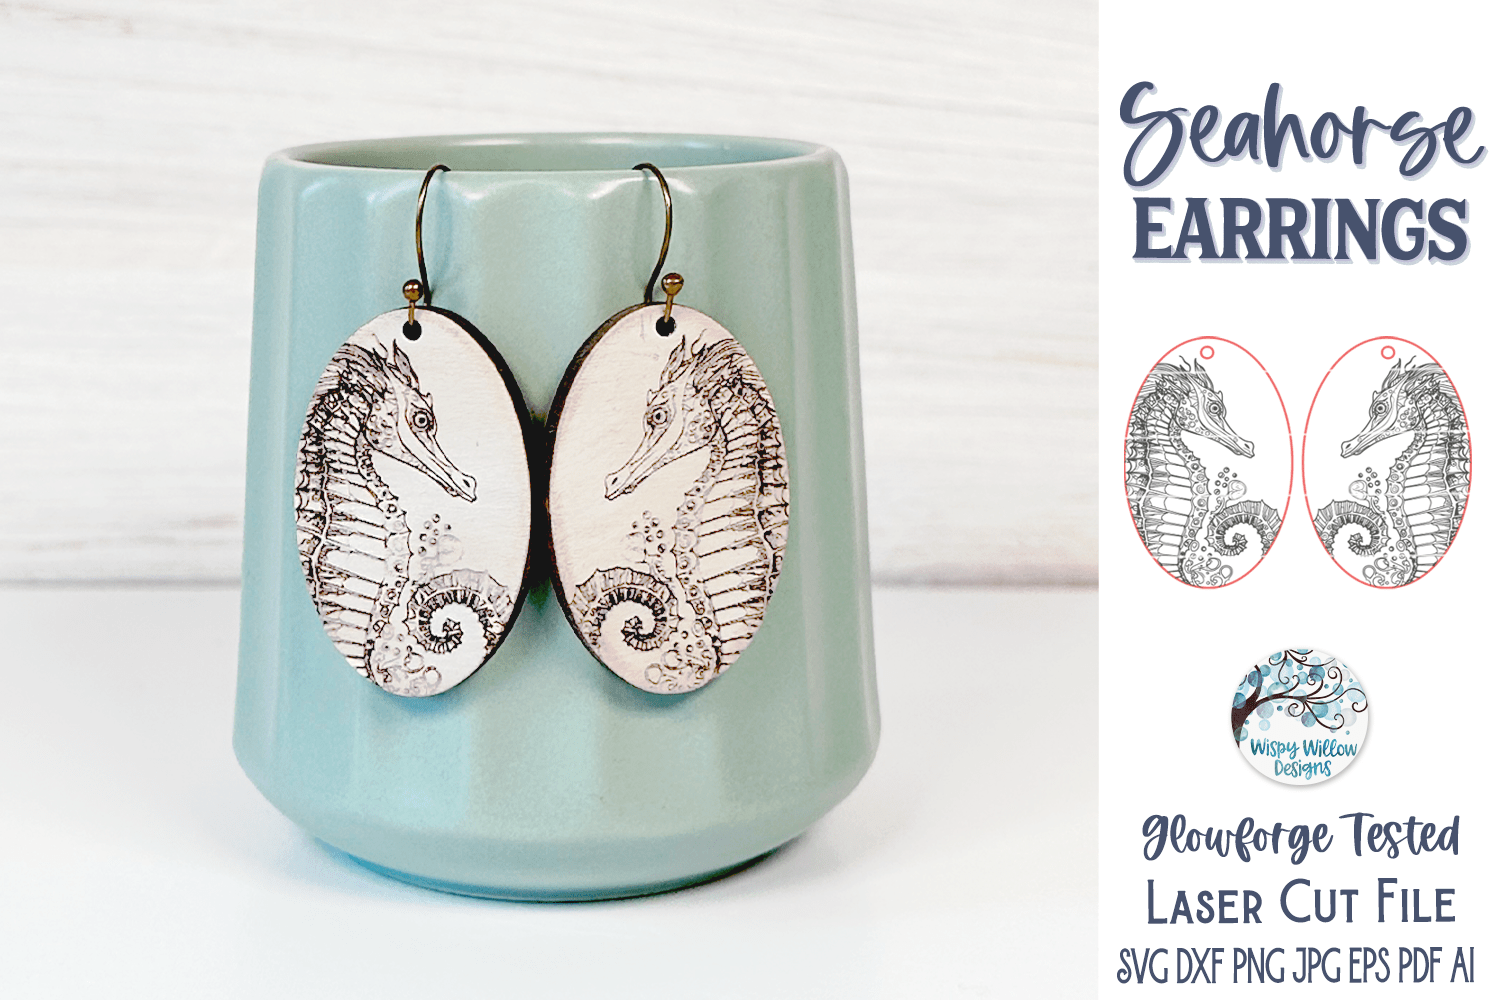 Seahorse Earring File for Glowforge or Laser Cutter Wispy Willow Designs Company